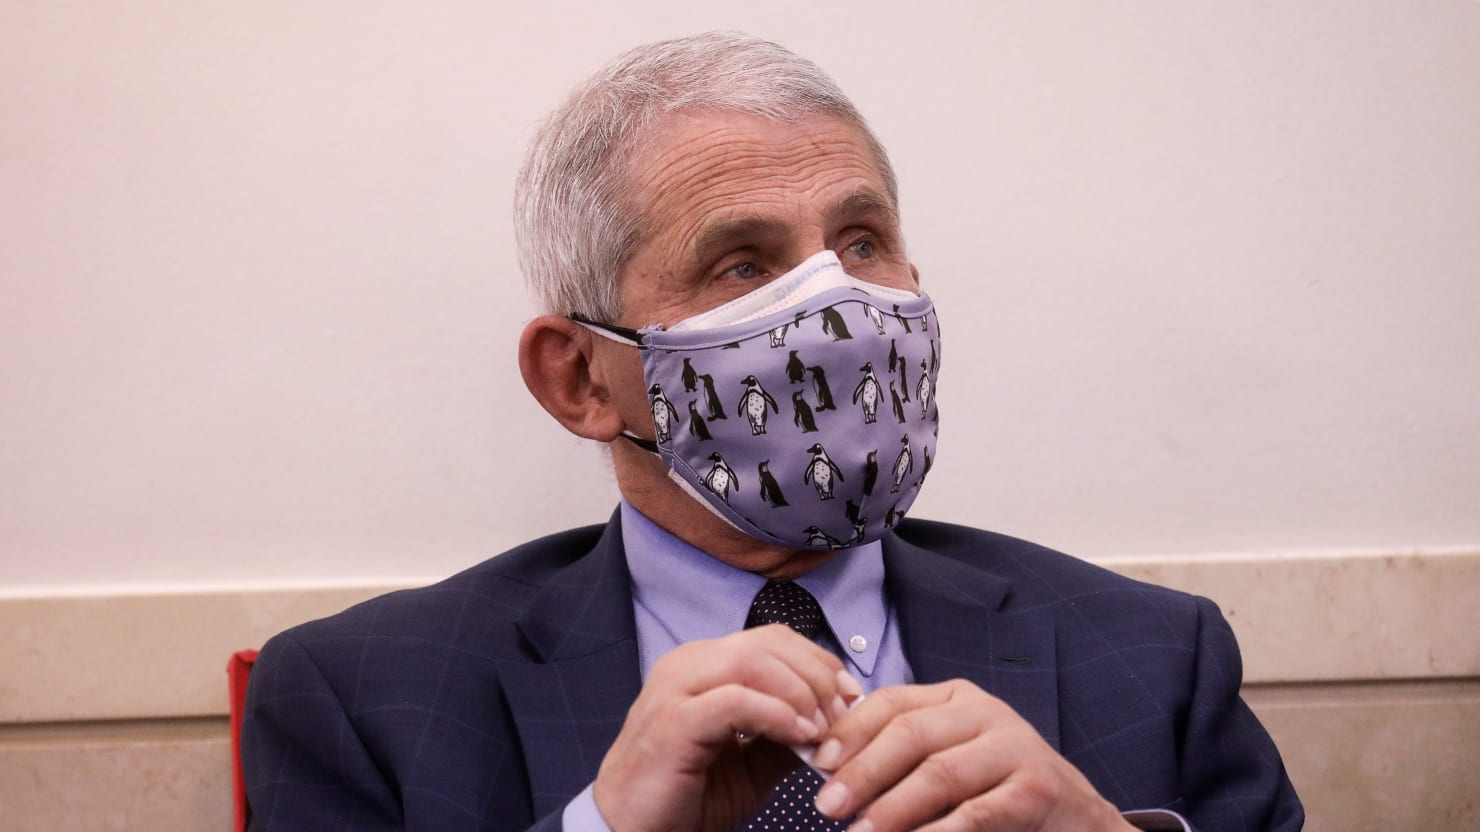 Fauci warns of ‘setback’ in COVID fight after brutal polar vortex